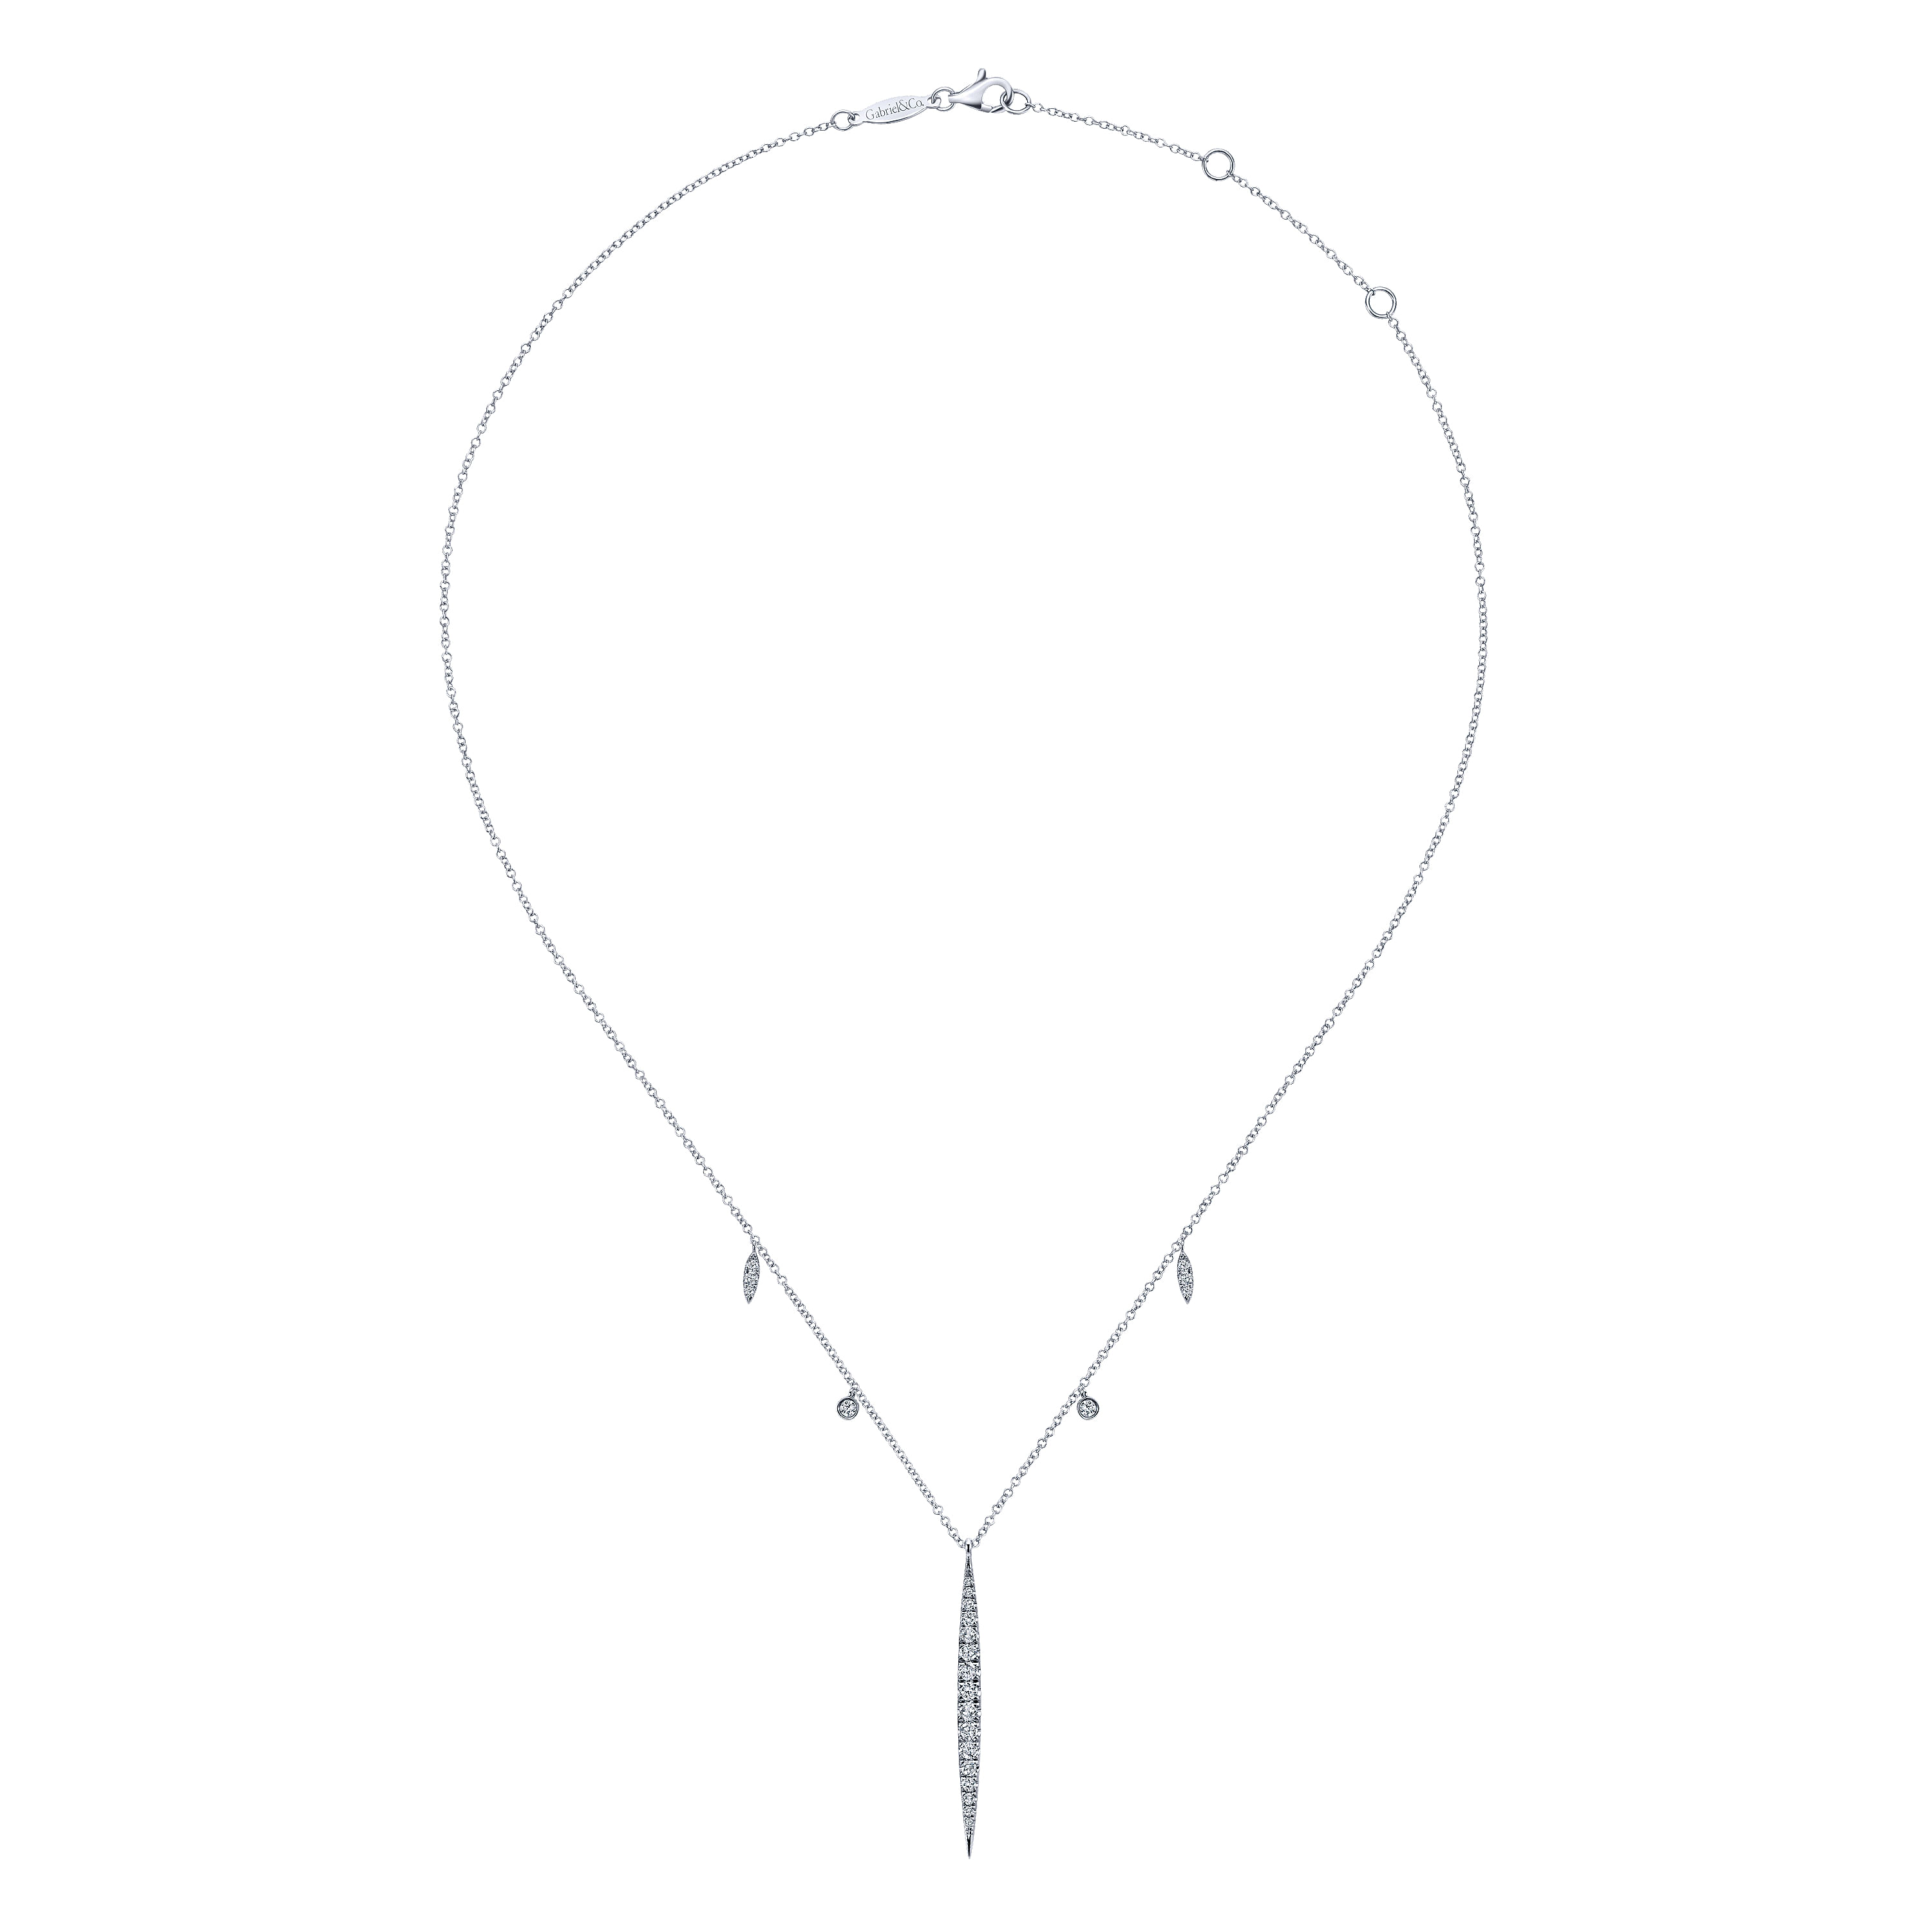 14K White Gold Diamond Spear Pendant Necklace with Chain Drops